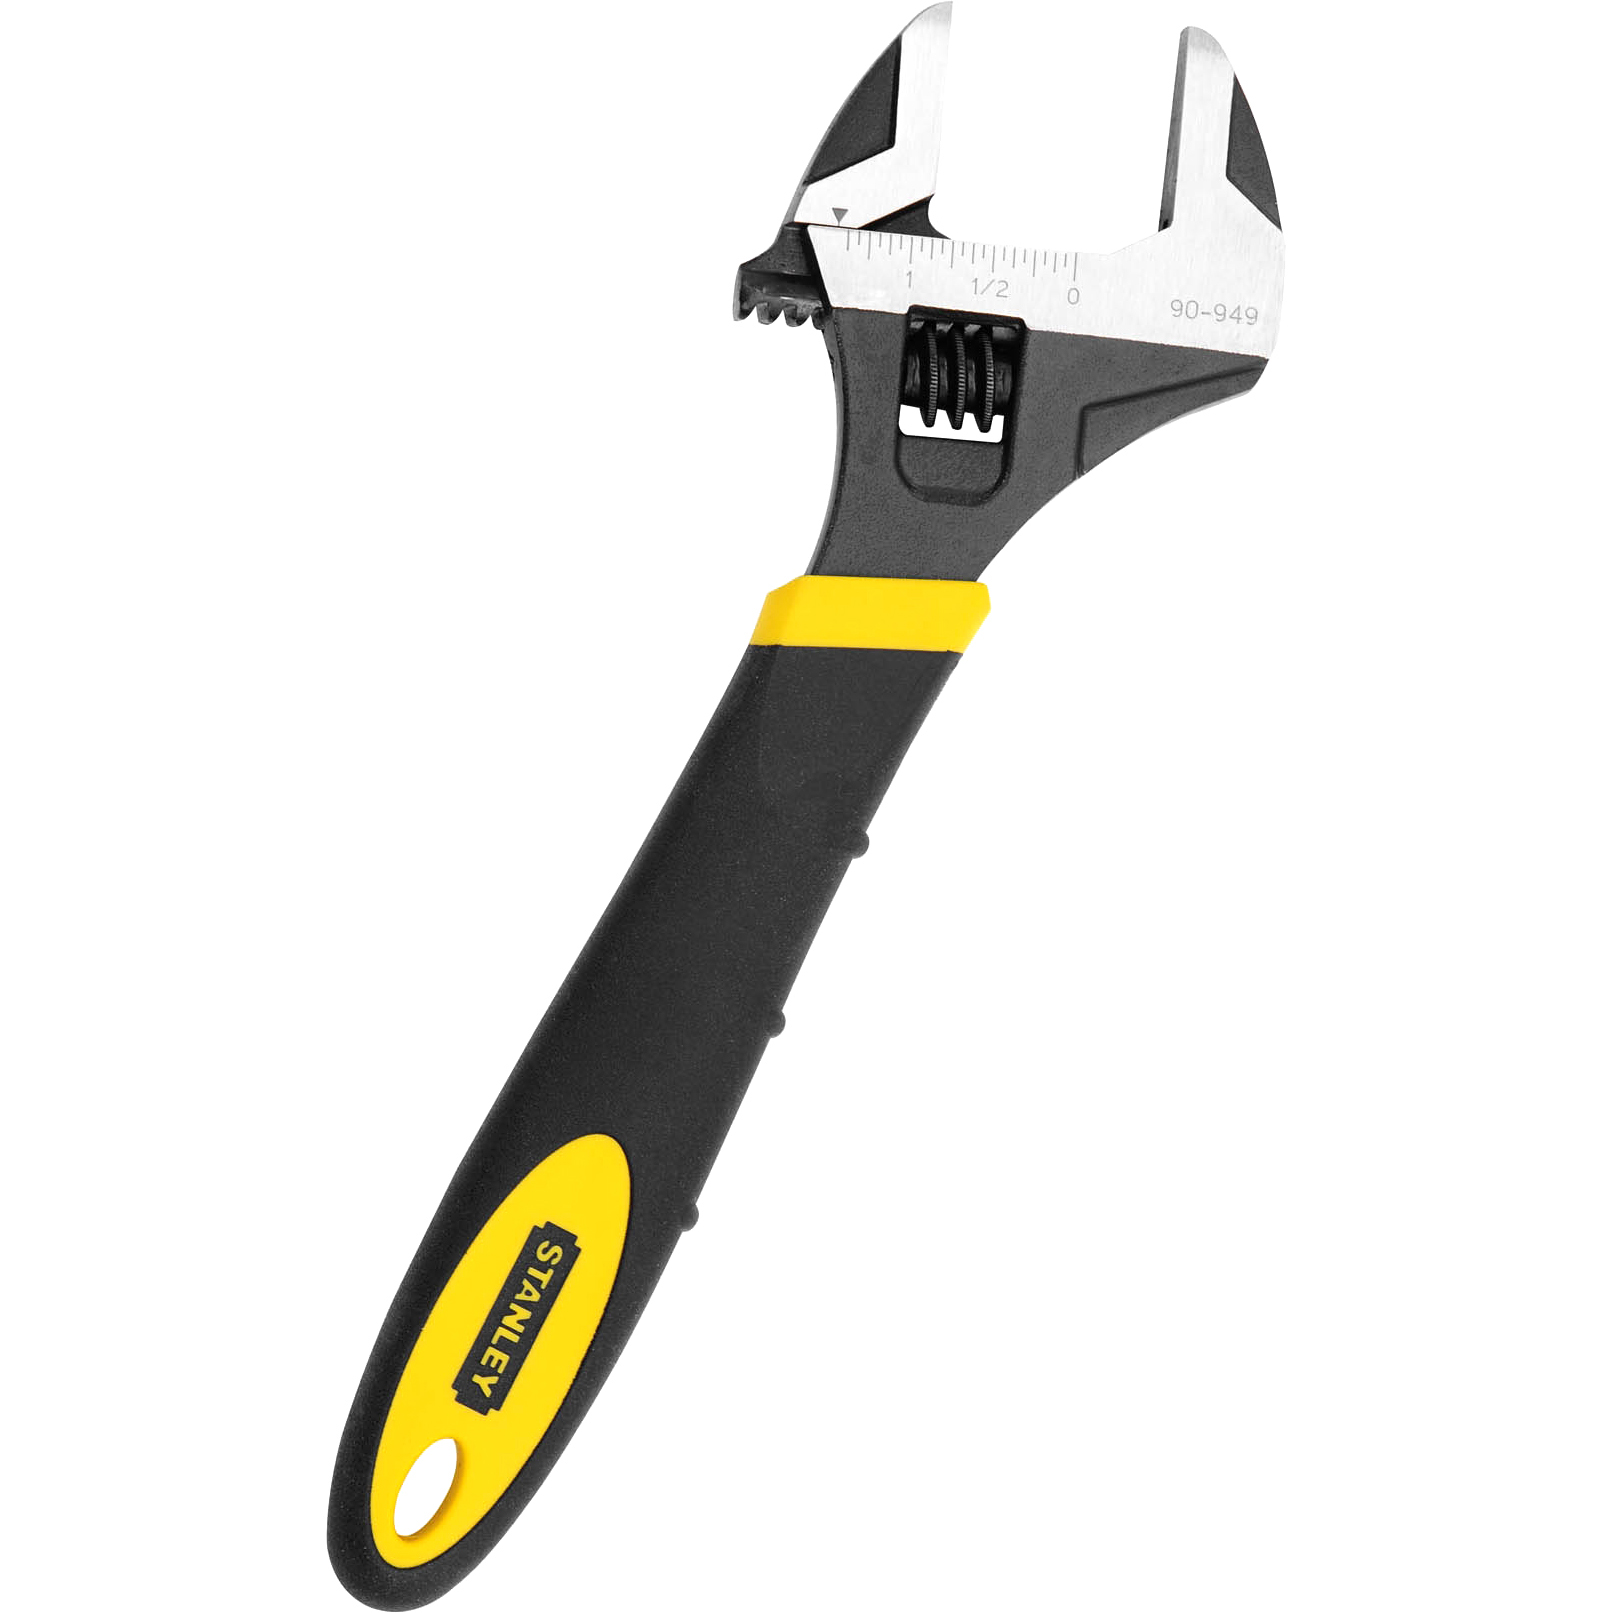 STANLEY 90-949 10-Inch Adjustable Wrench - image 2 of 2